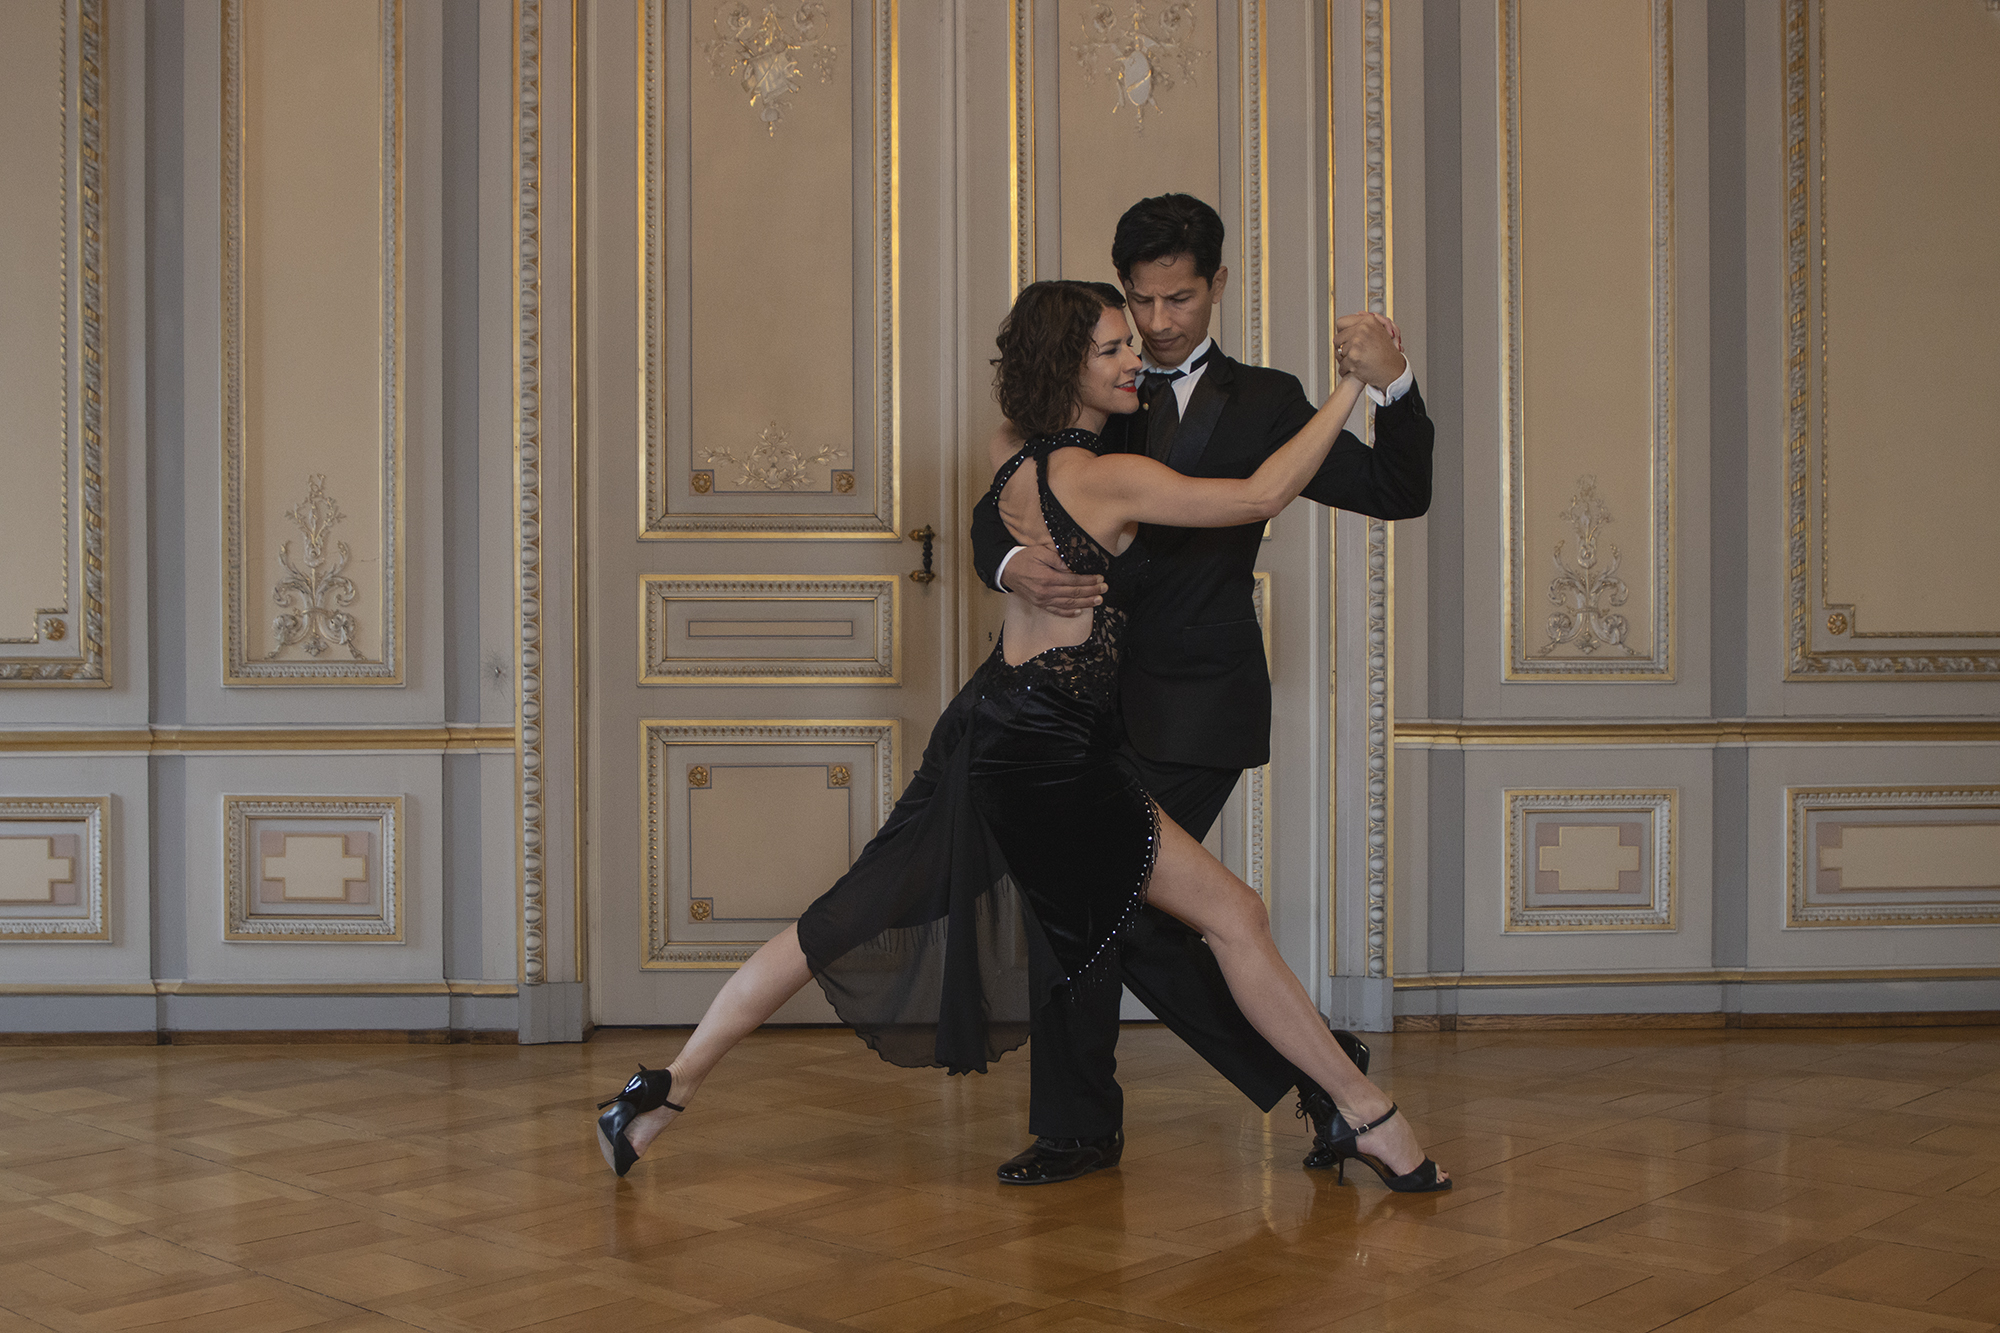 Tango holiday with Rafael Herbas and Lea Graber